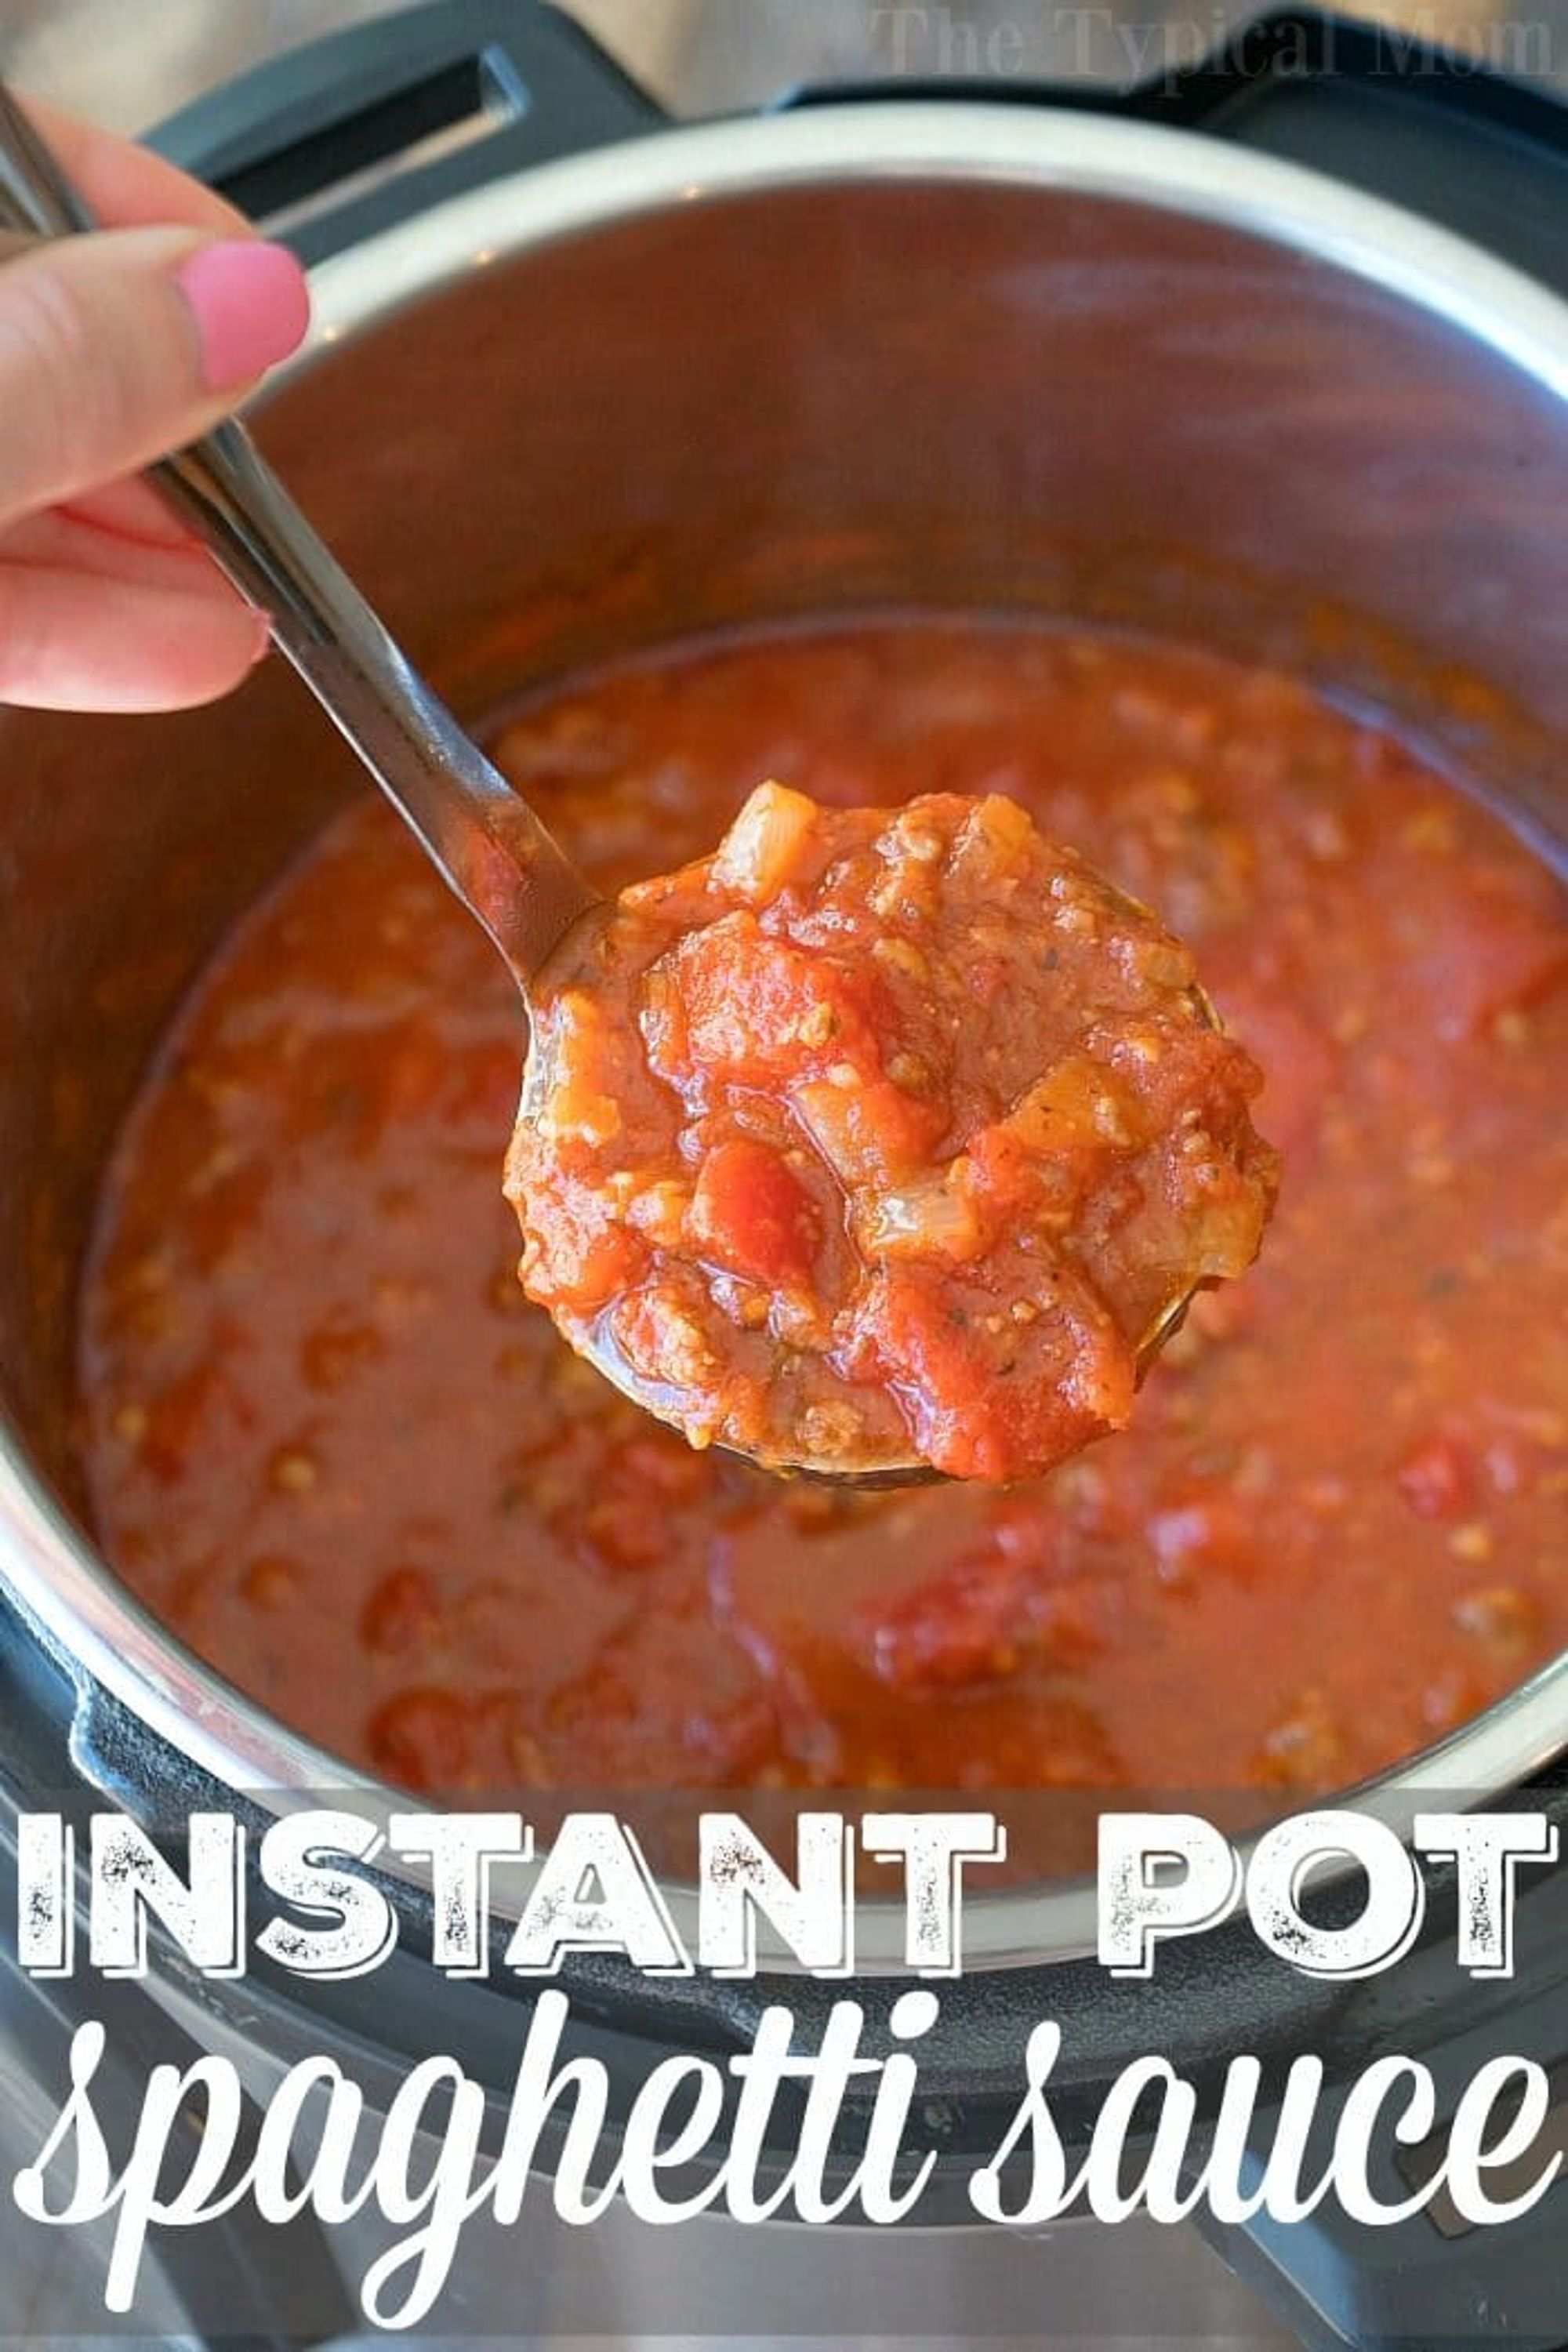 Homemade Instant Pot Spaghetti Sauce · The Typical Mom